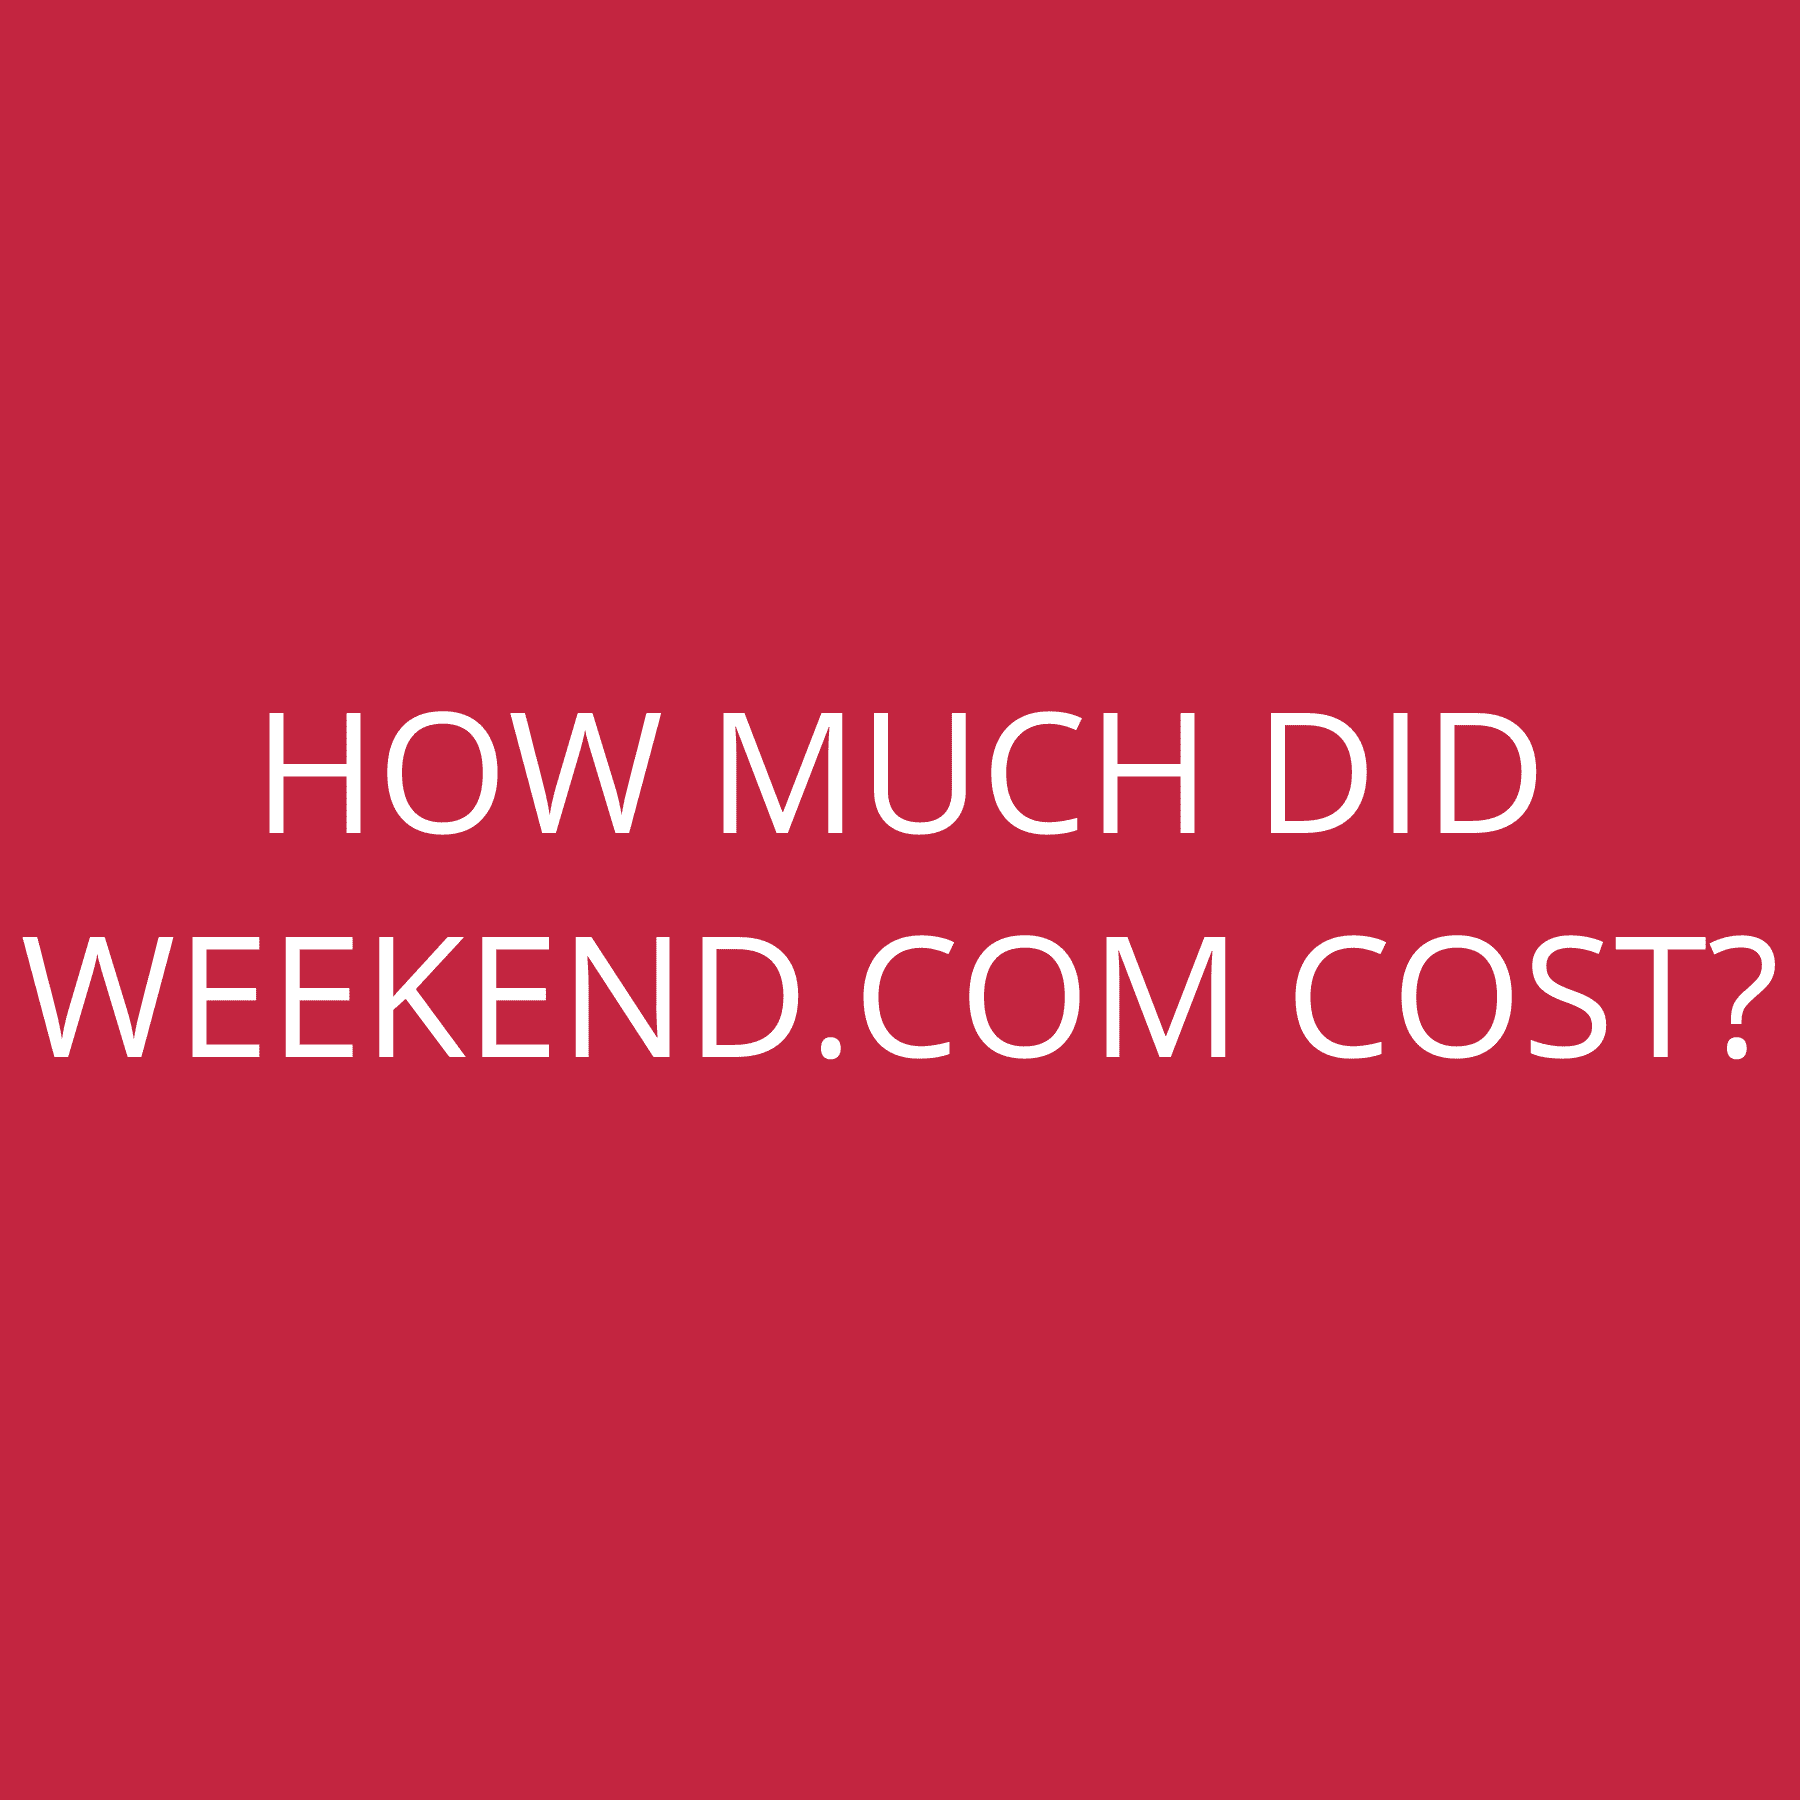 How much did Weekend.com cost?